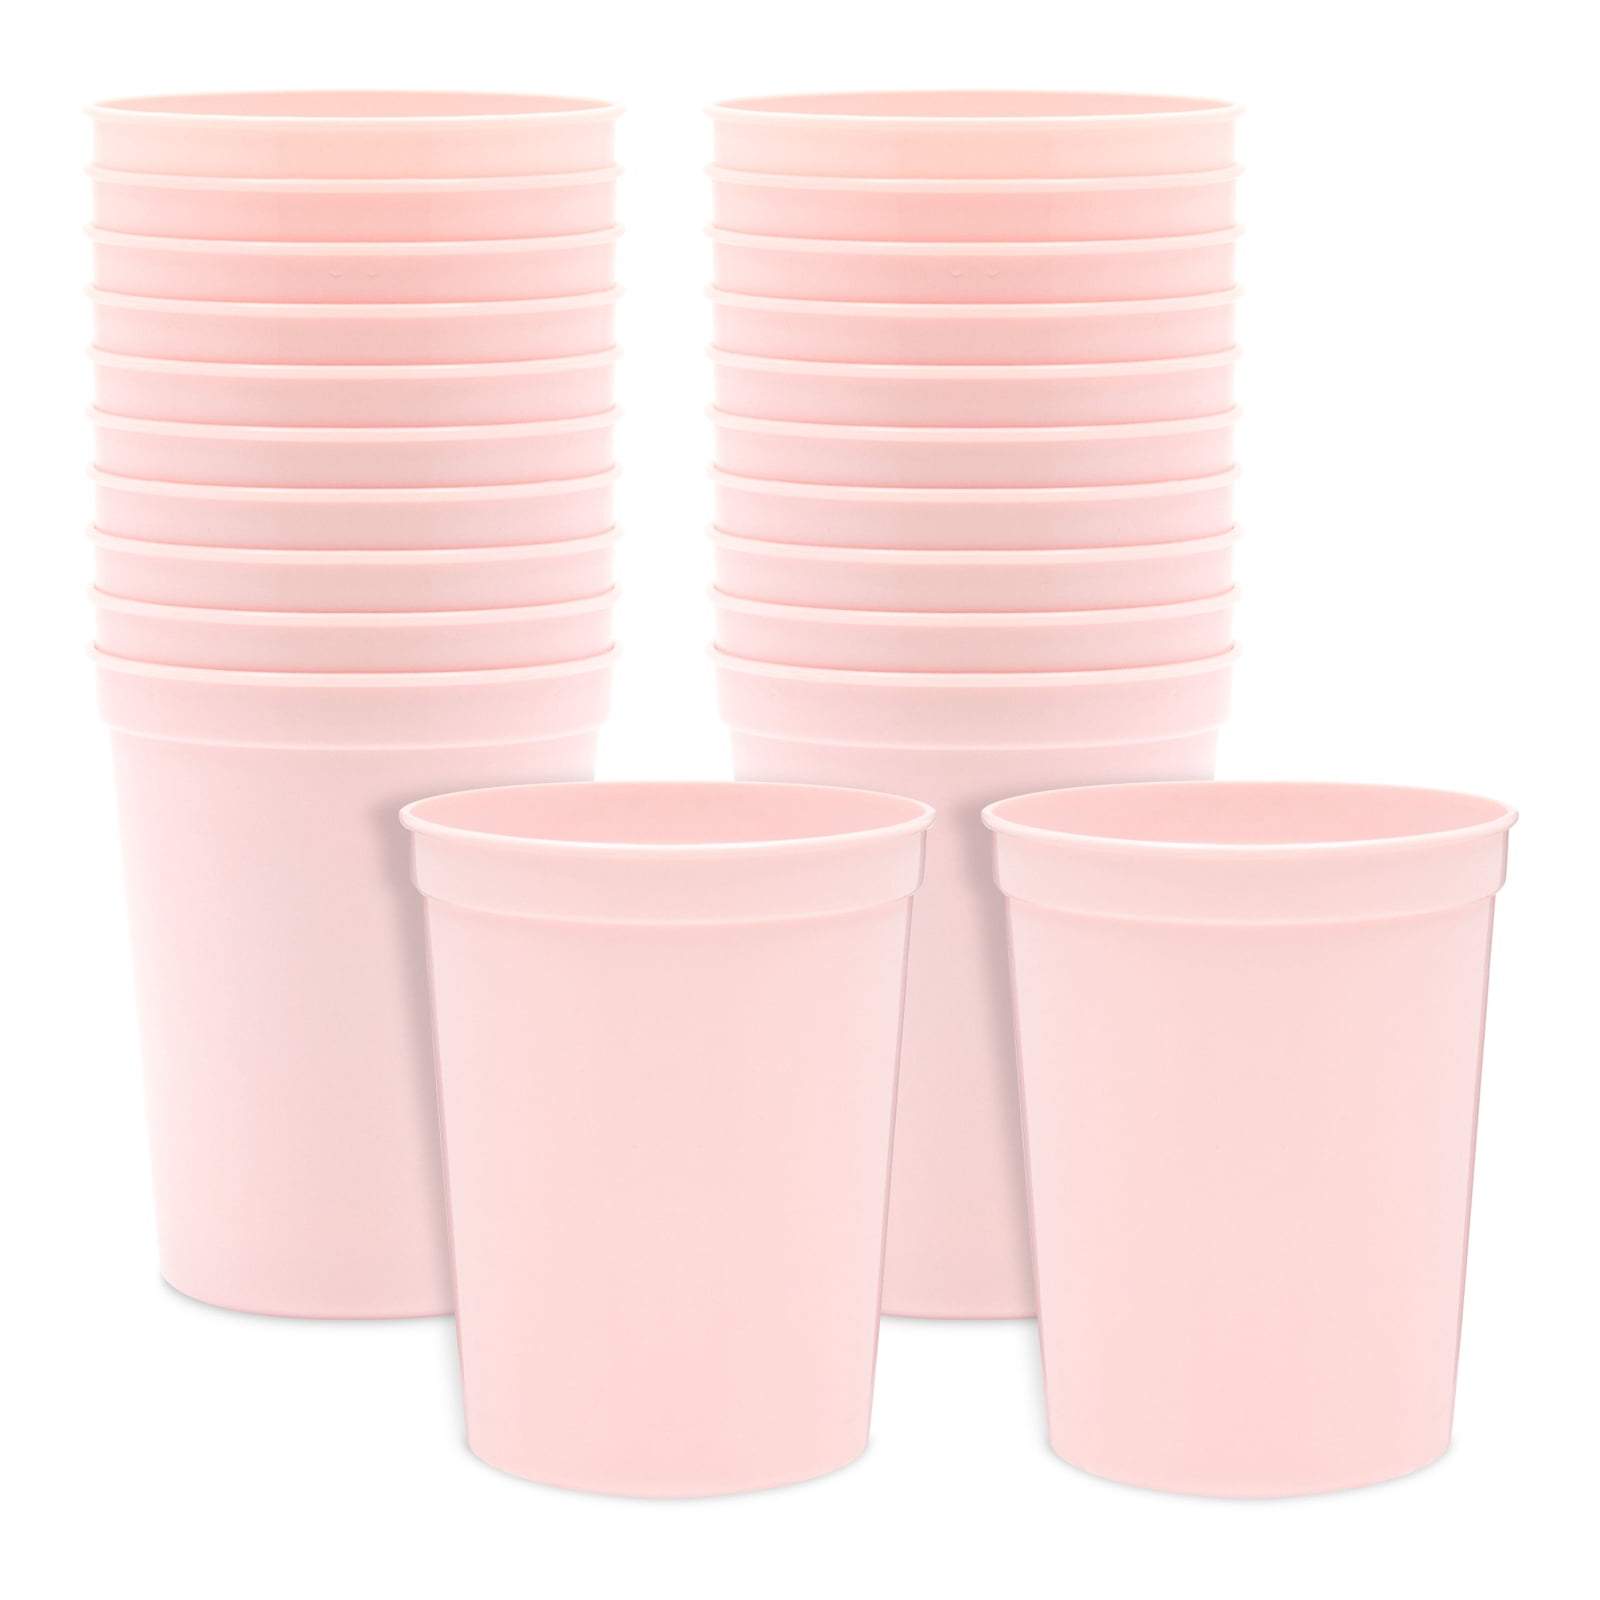 Tropical Wedding Beach Wedding 438 Wedding Plastic Mood Cups To Have and To Hold Pink Mood Cups